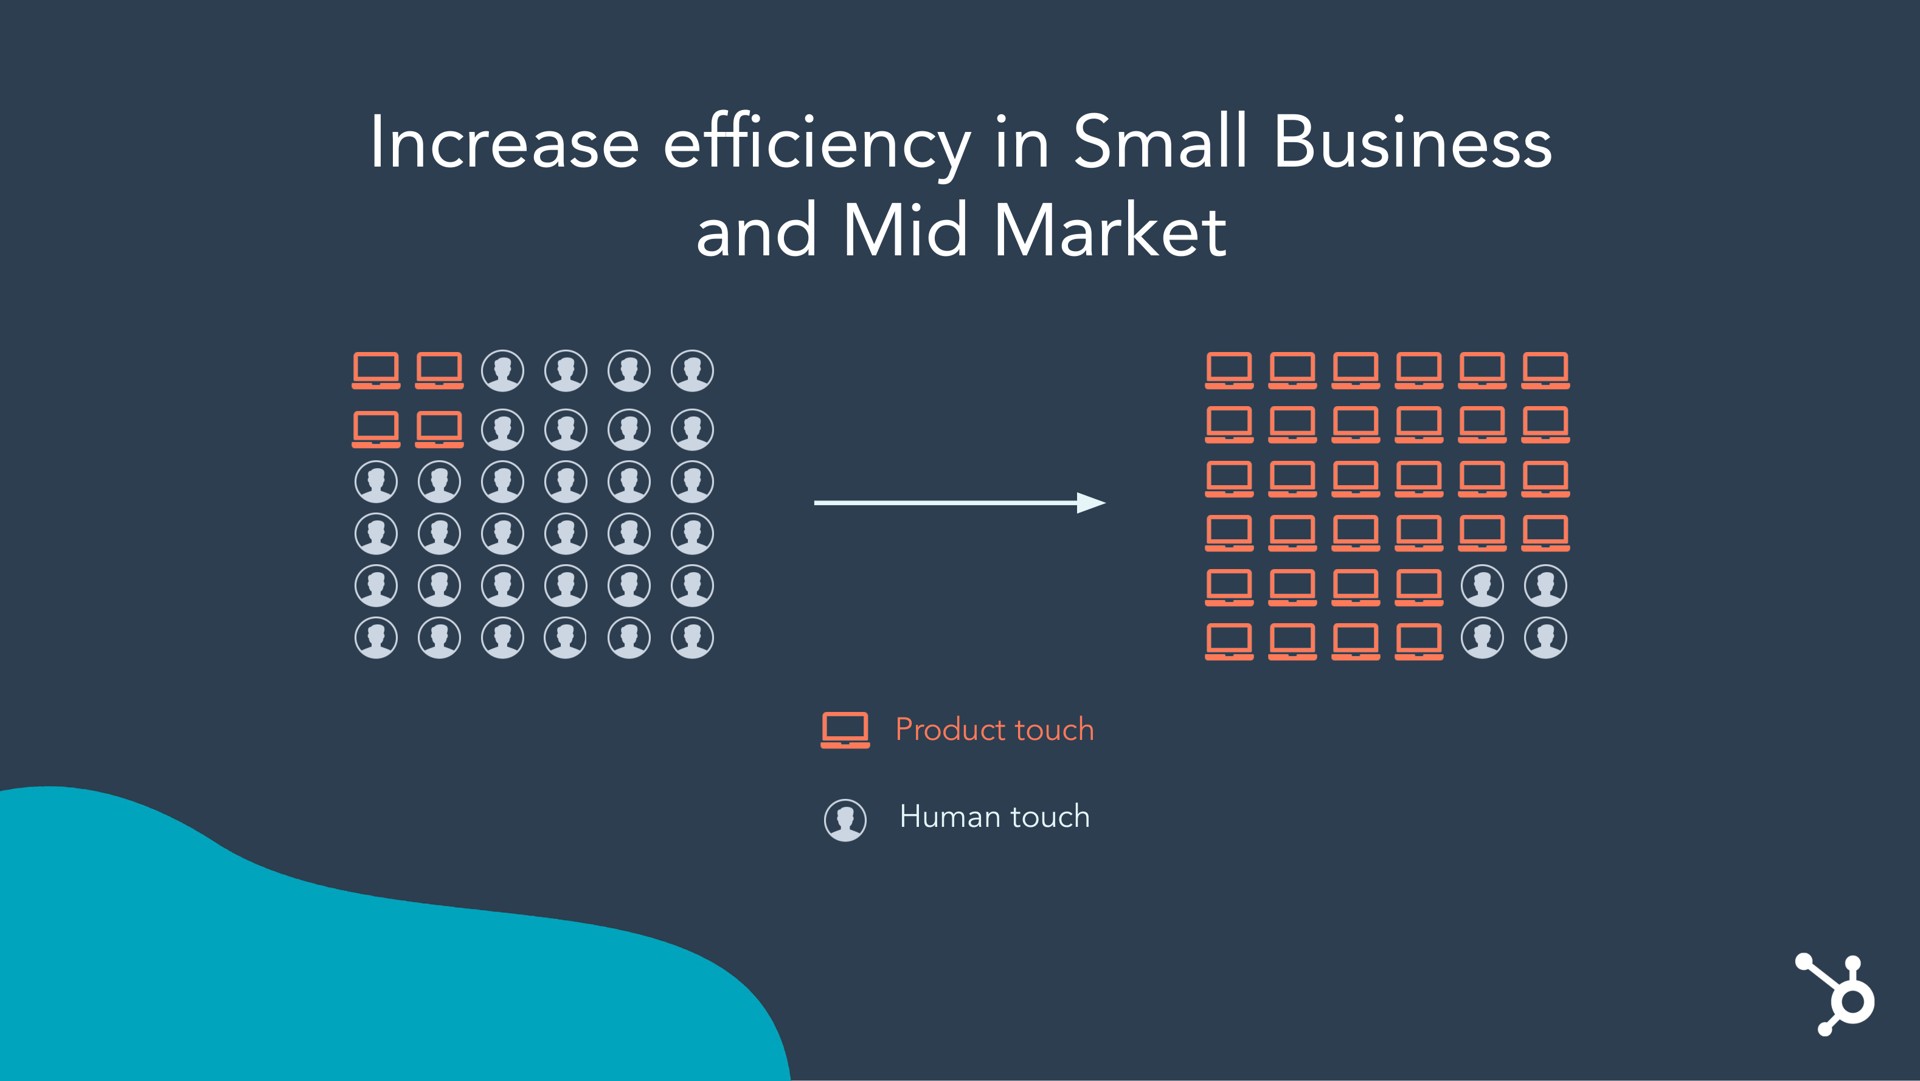 increase in small business and mid market efficiency | Hubspot